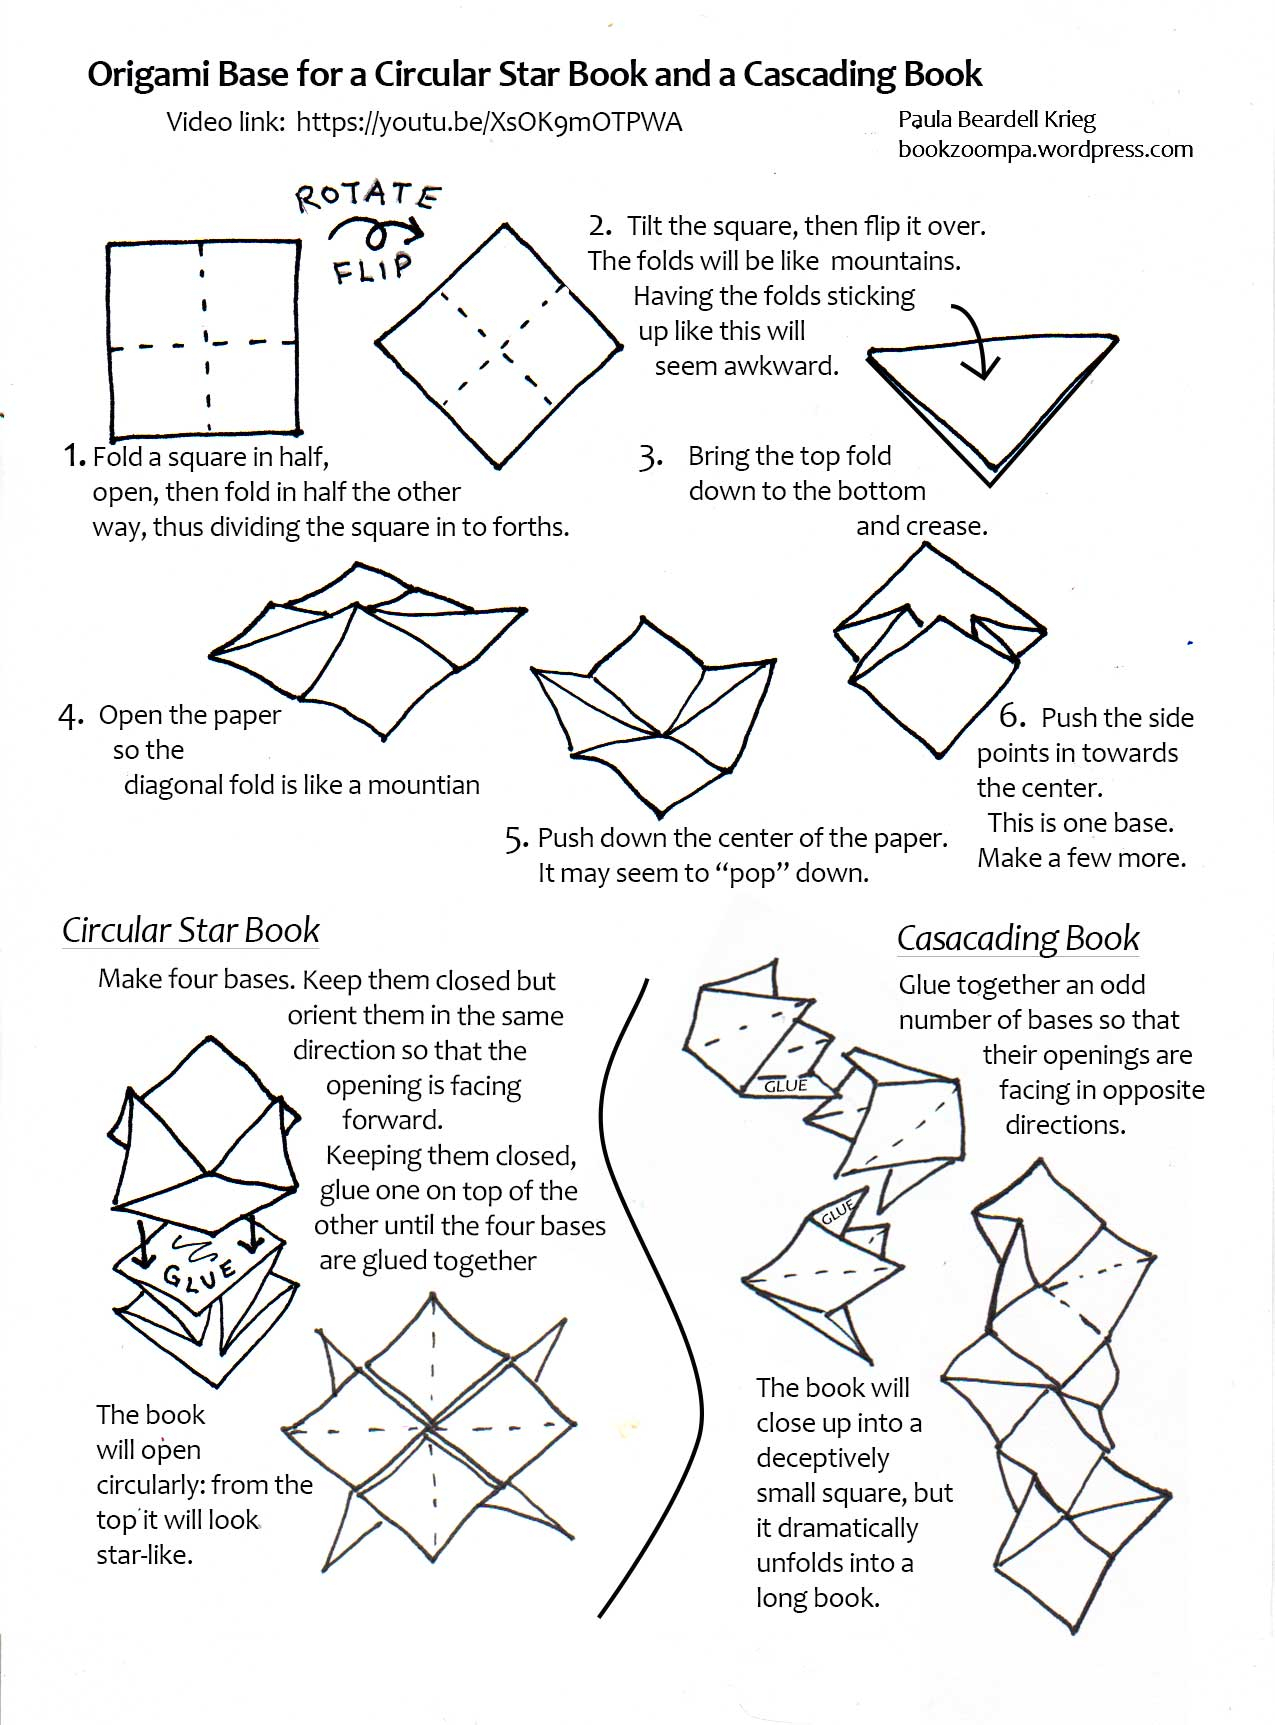 Origami One Sheet Books Made From One Sheet Of Folded Paper Playful Bookbinding And